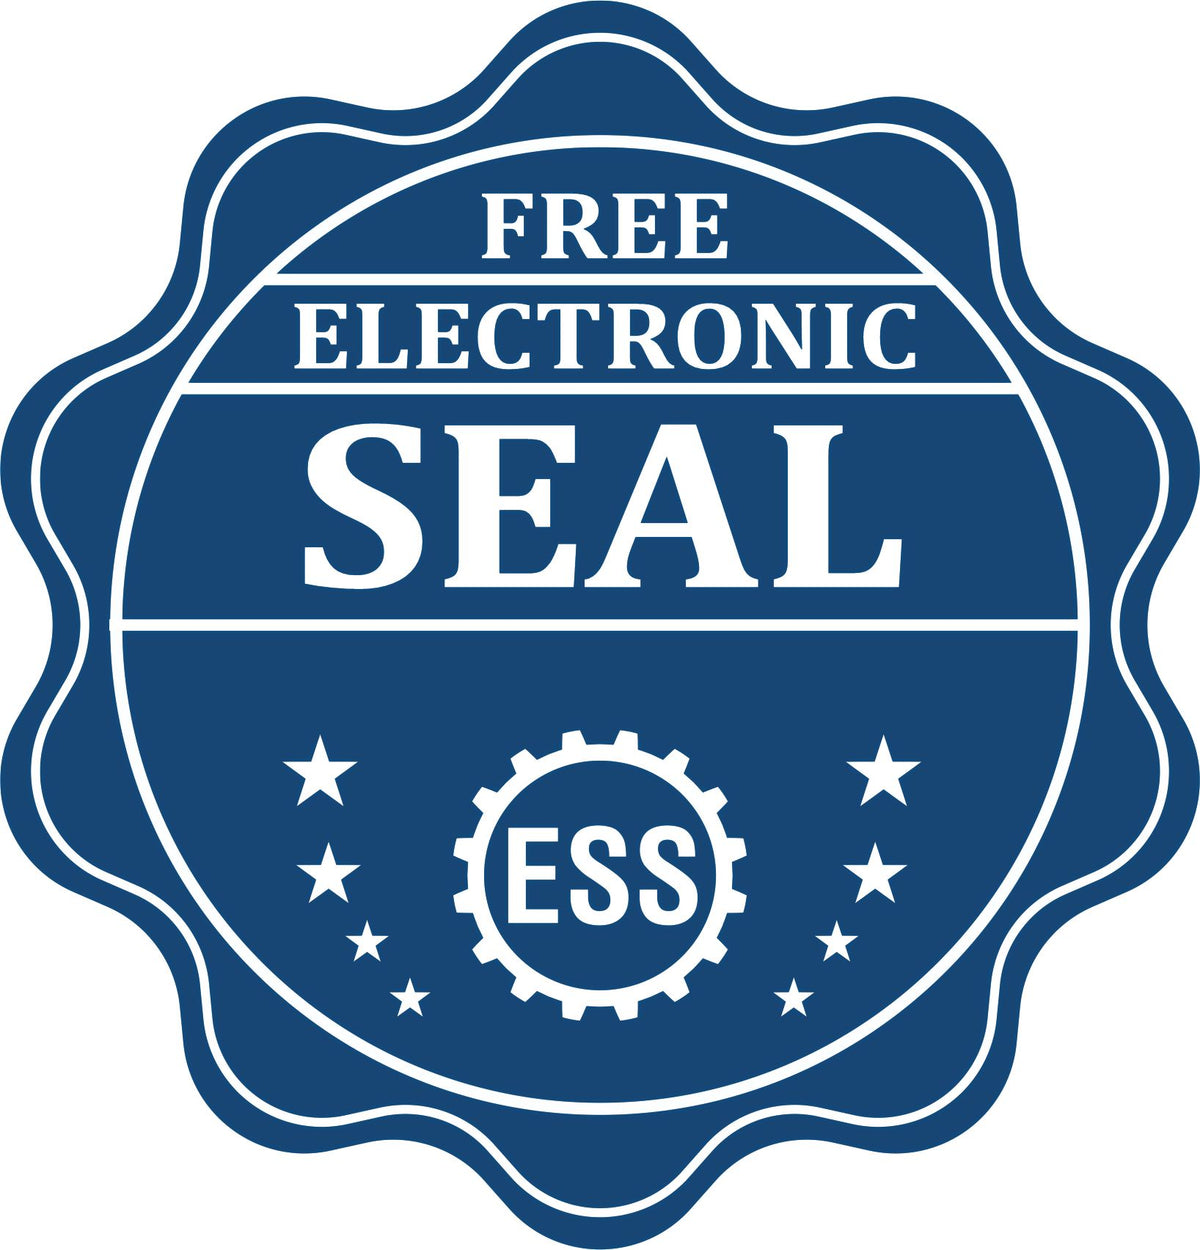 A badge showing a free electronic seal for the State of Mississippi Extended Long Reach Engineer Seal with stars and the ESS gear on the emblem.